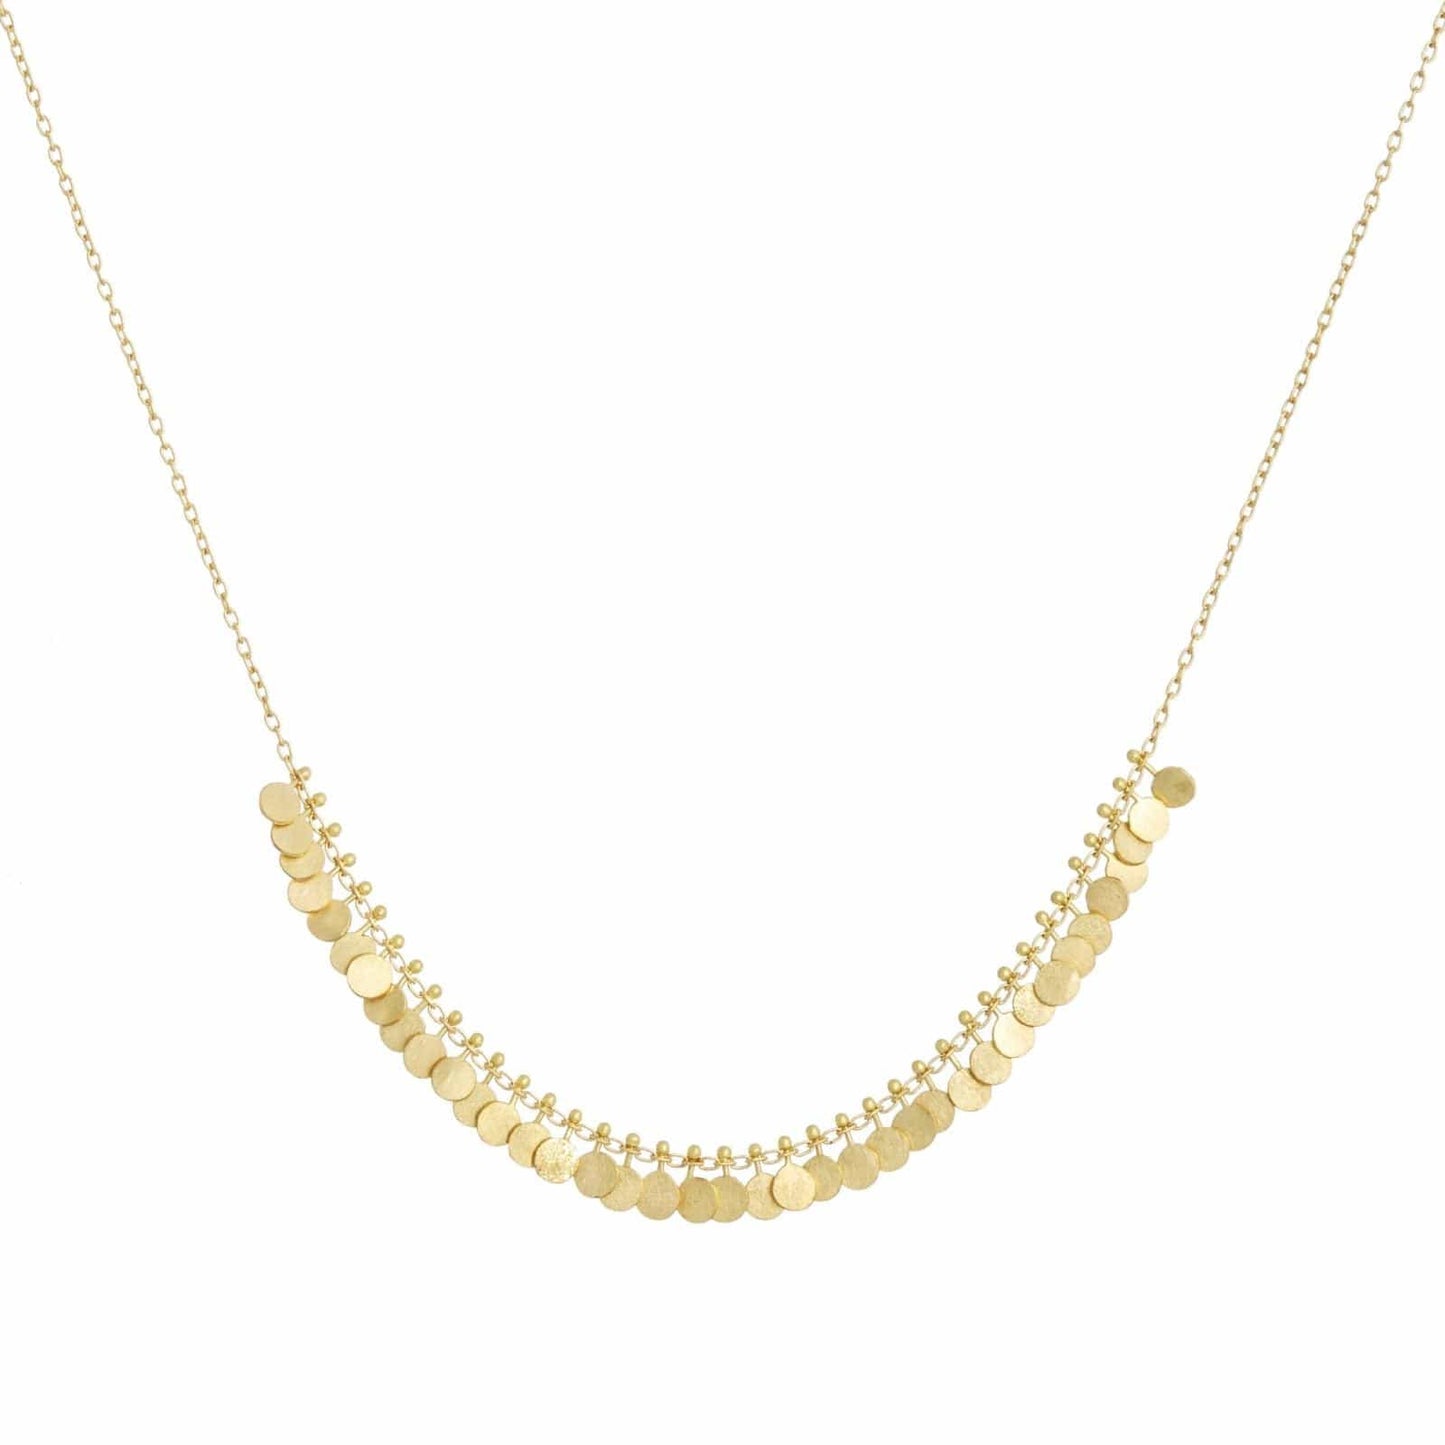 NKL-18K Yellow Gold Tiny Dots Arc Necklace